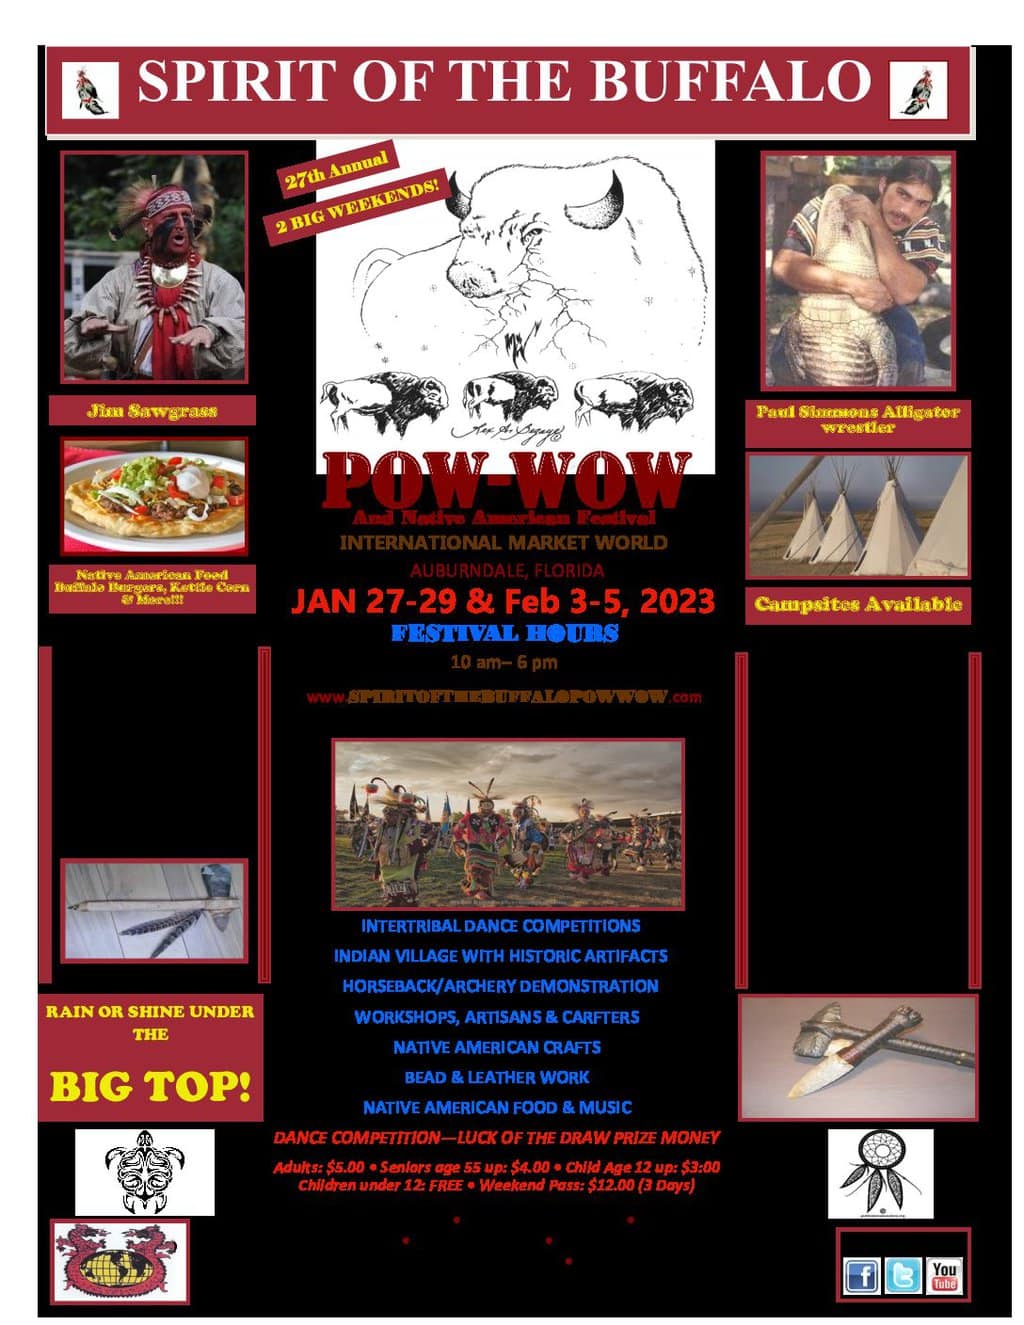 27th Annual Spirit of the Buffalo Pow Wow 2023 - 2 weekend event